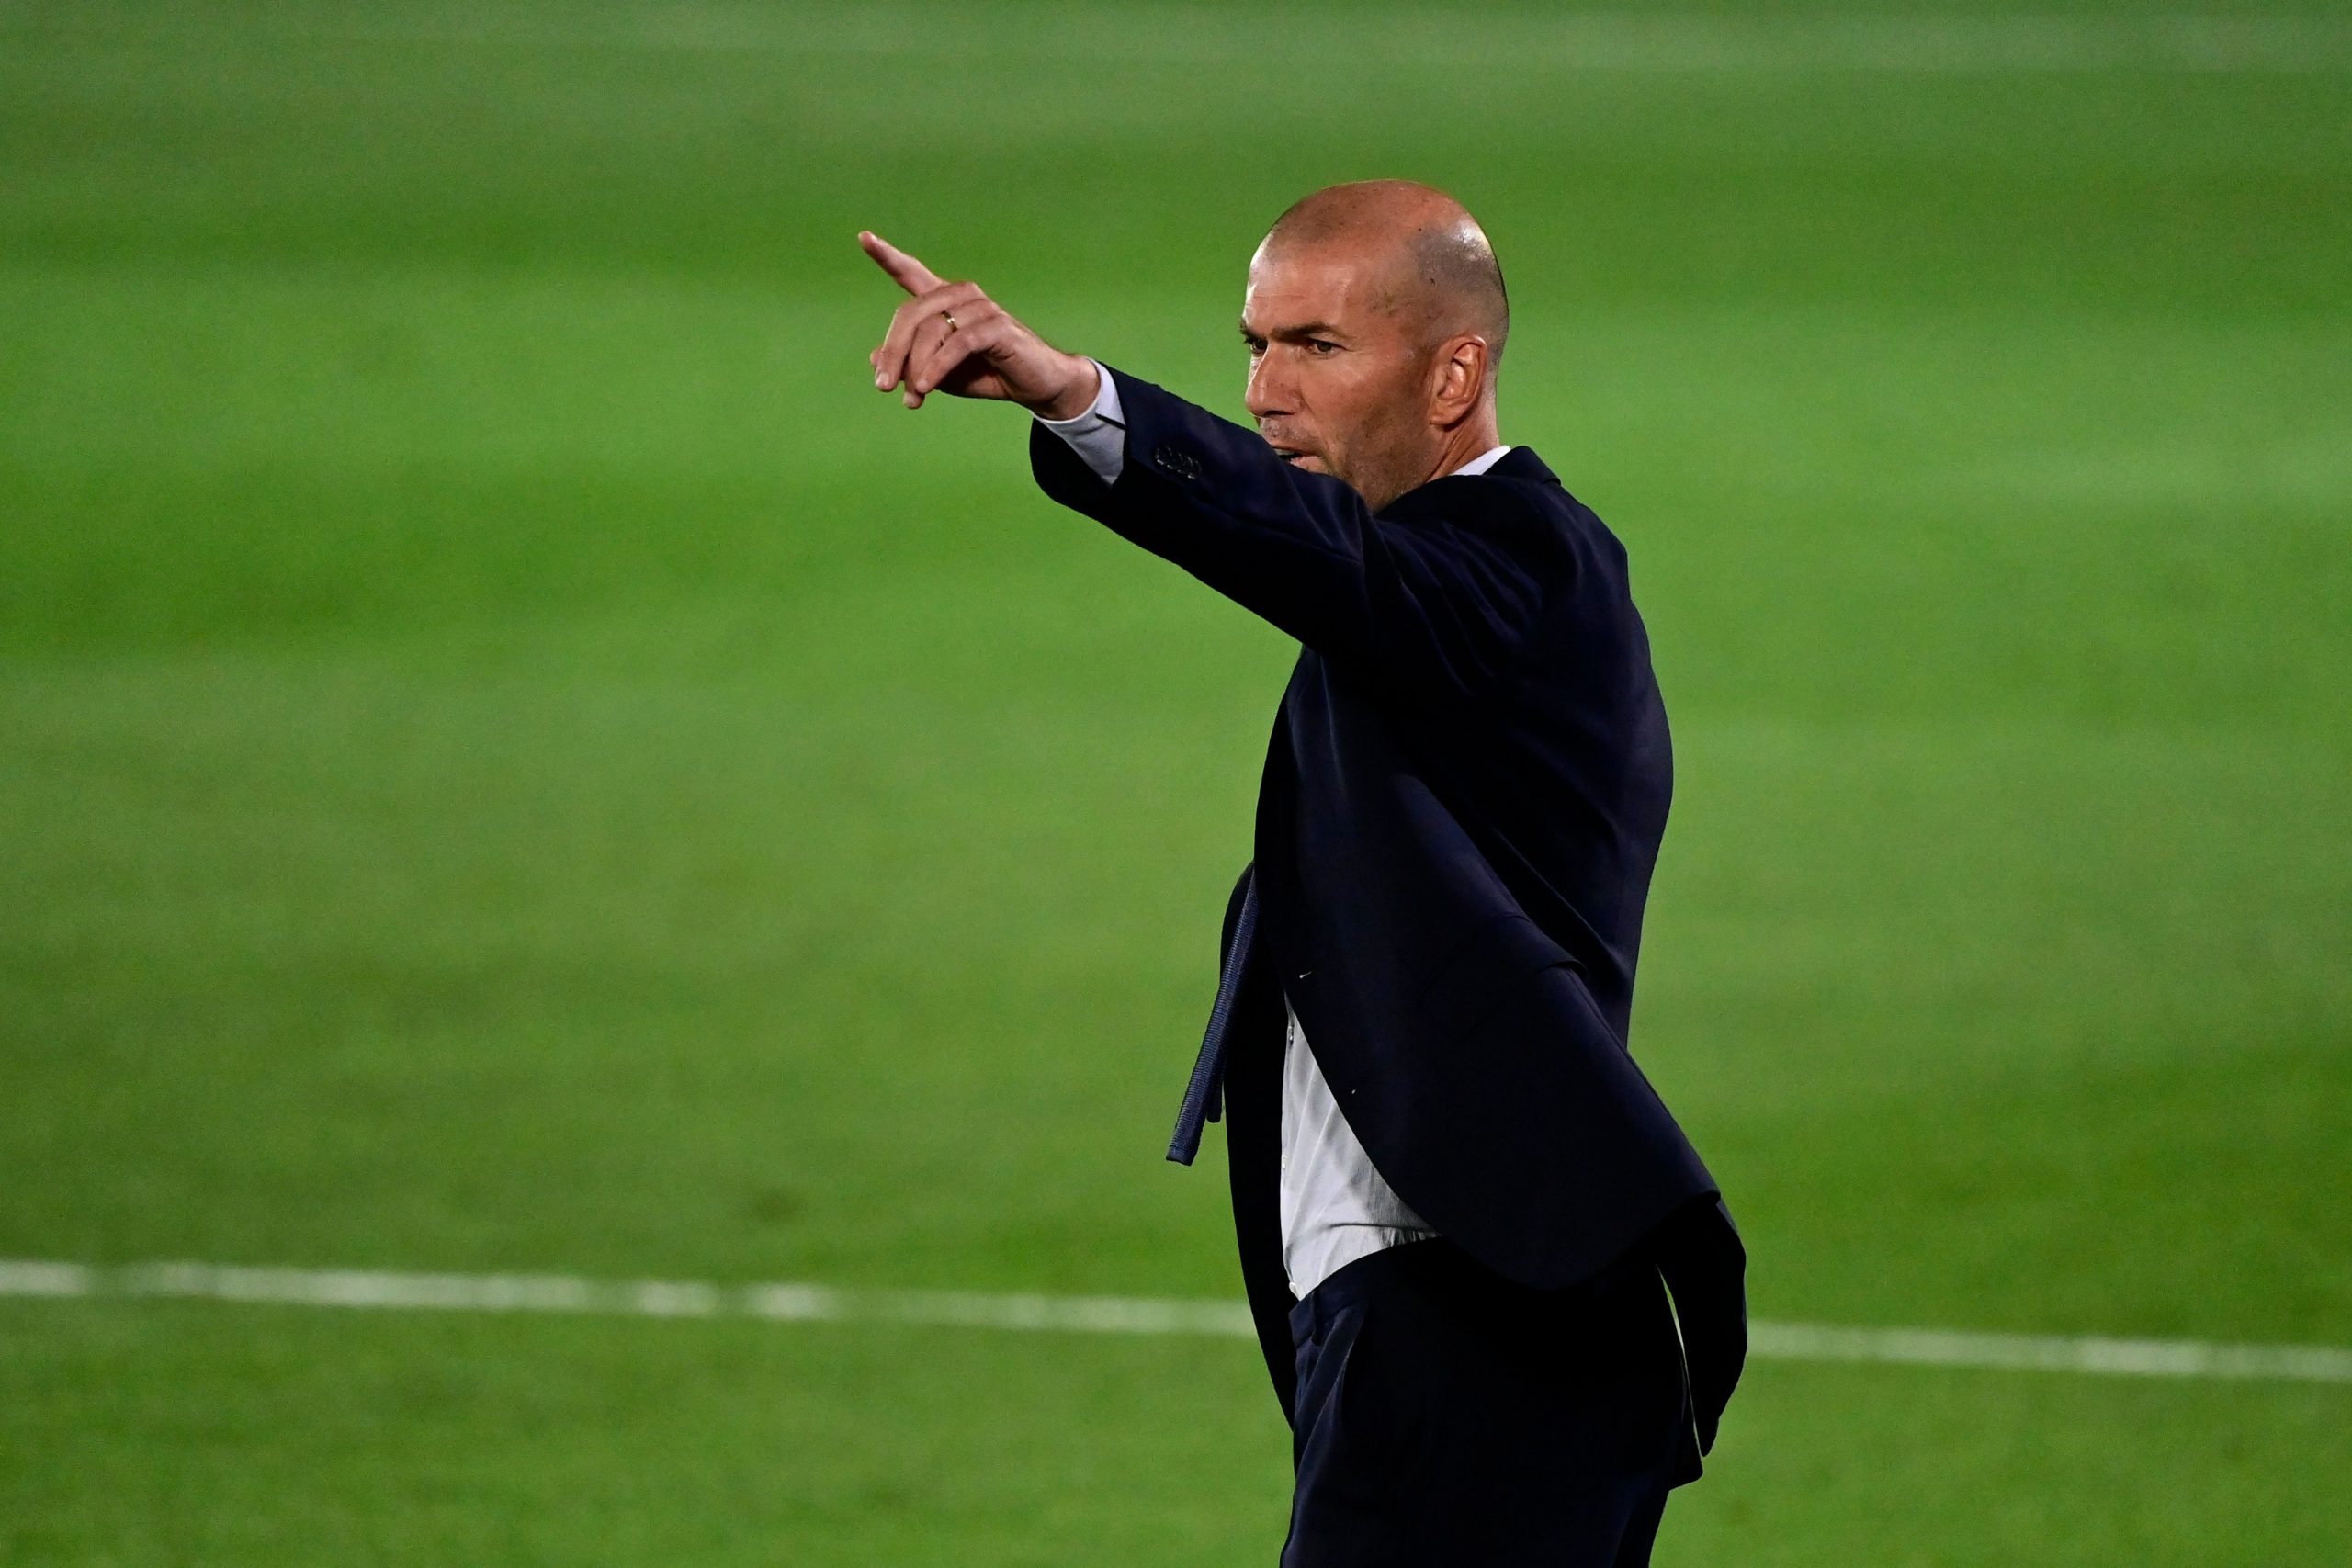 Zinedine Zidane is the manager of Real Madrid